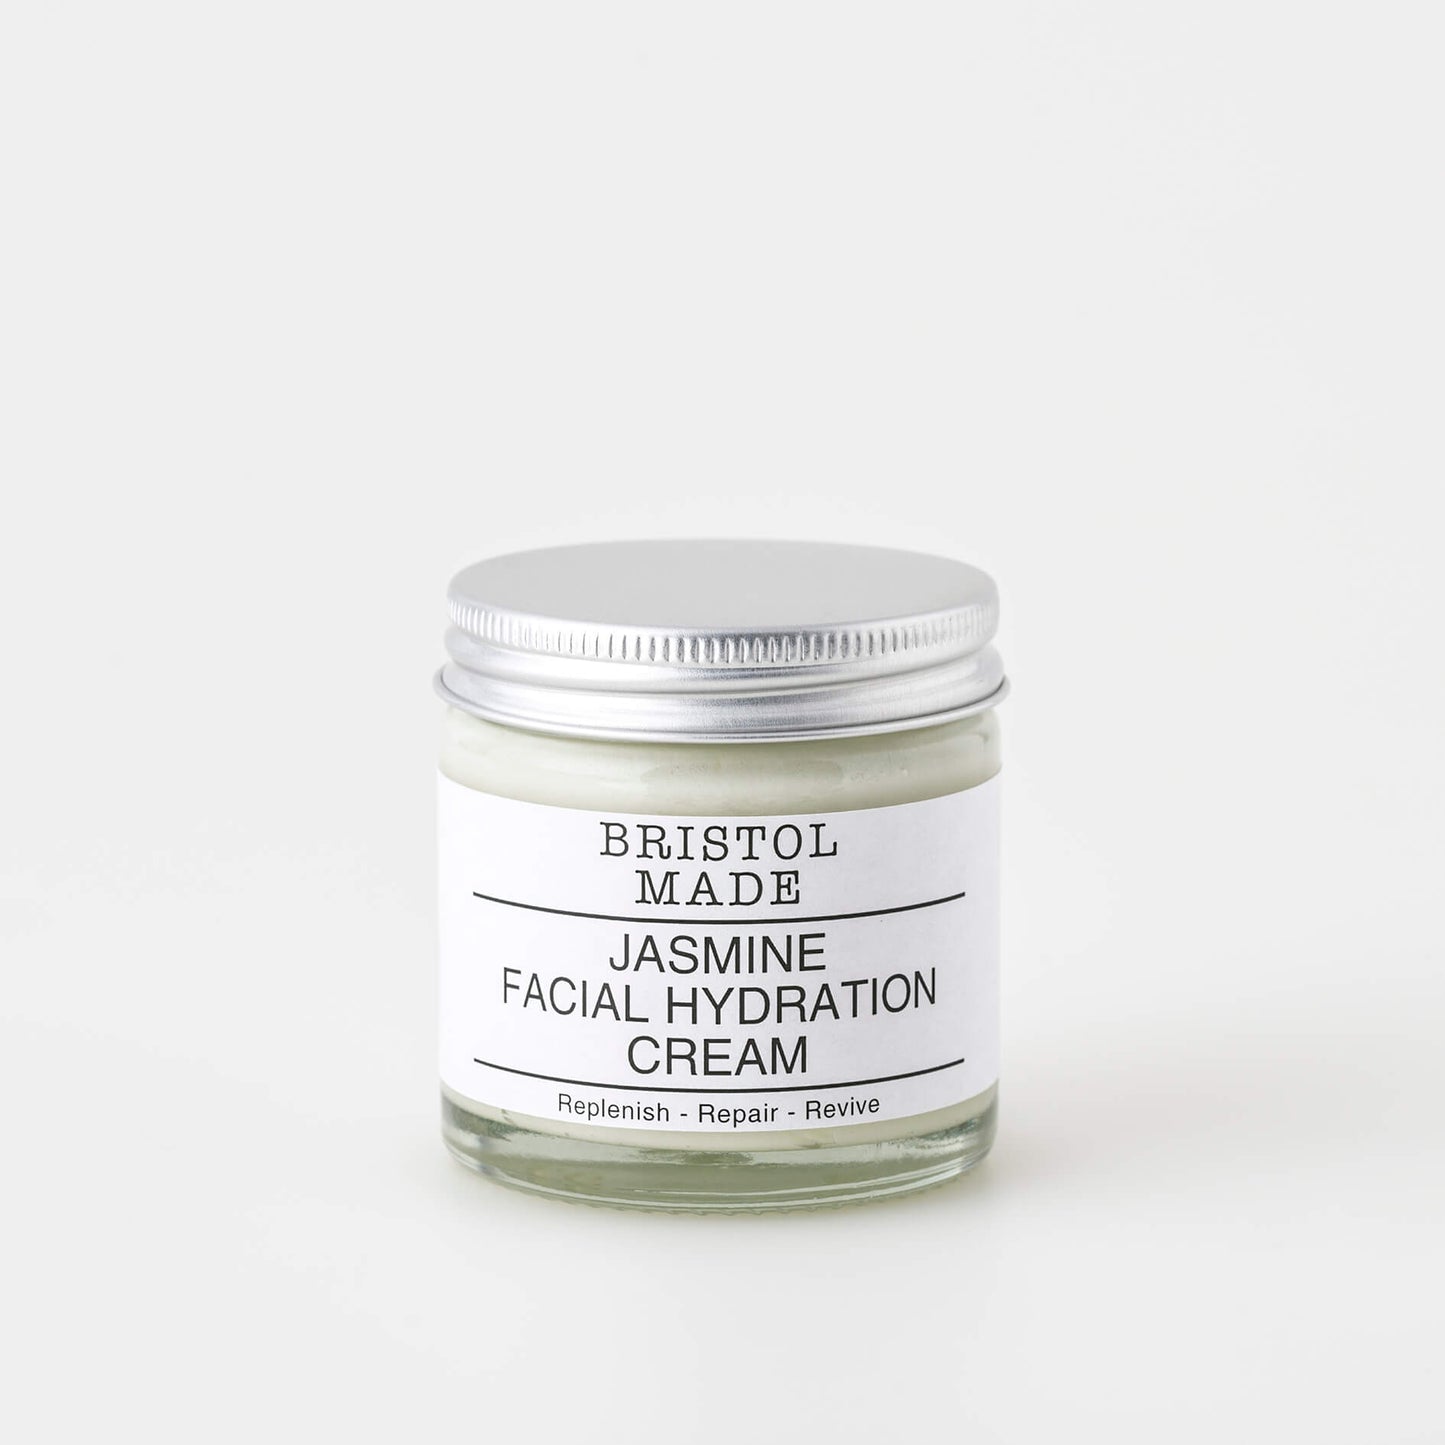 A 60ml clear glass jar of Bristolmade jasmine face cream, featuring a white label with black text, highlighting its vegan ingredients. 